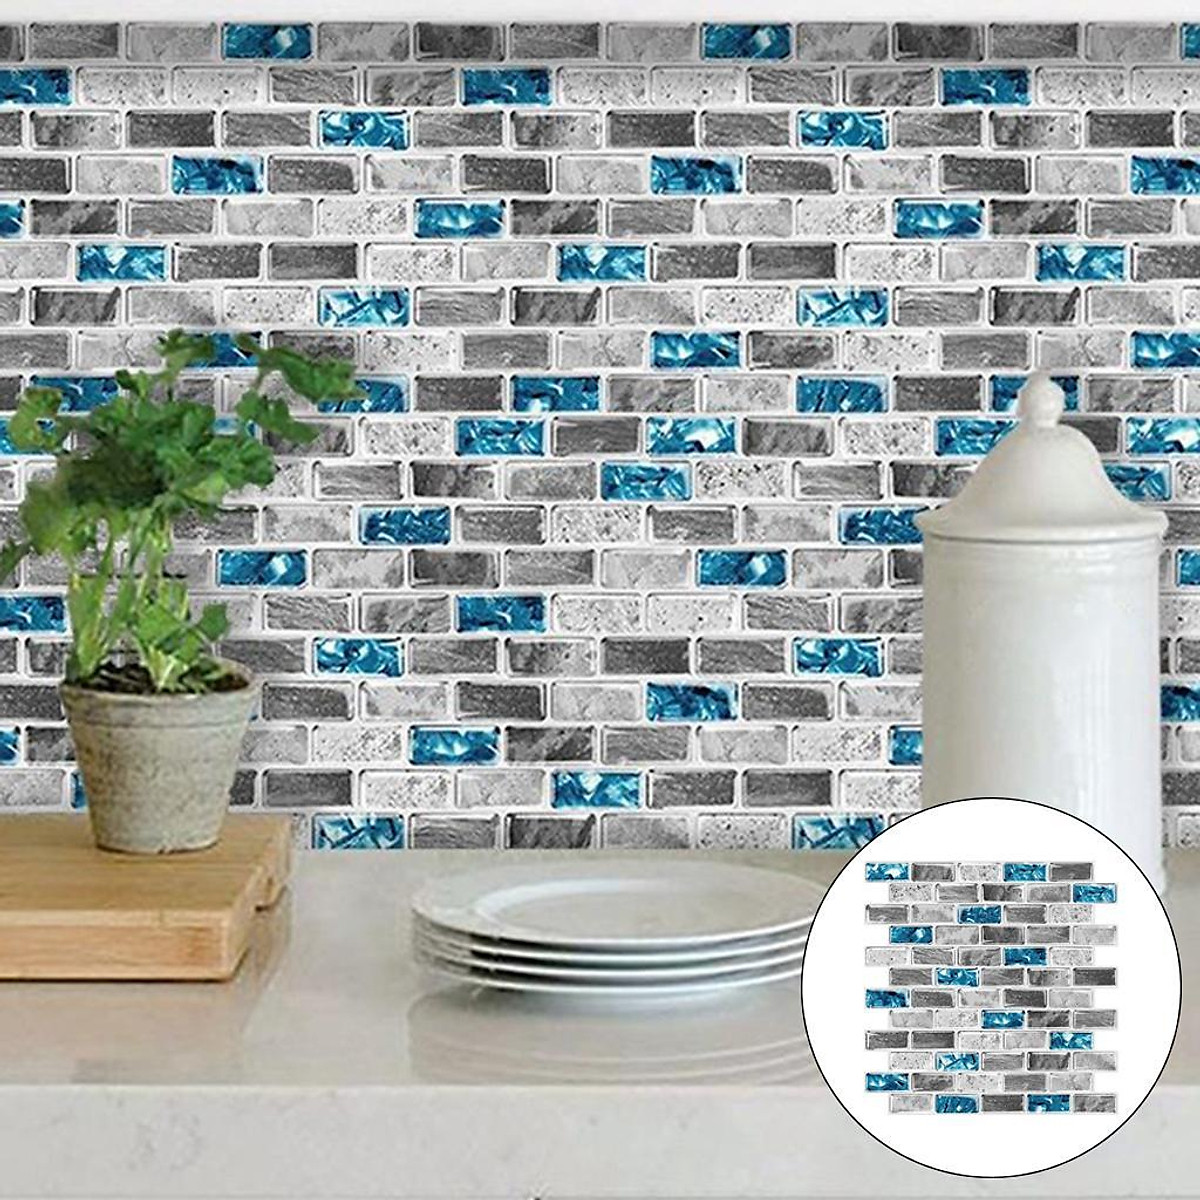 17 Budget-Friendly Backsplash Ideas that Only Look Expensive